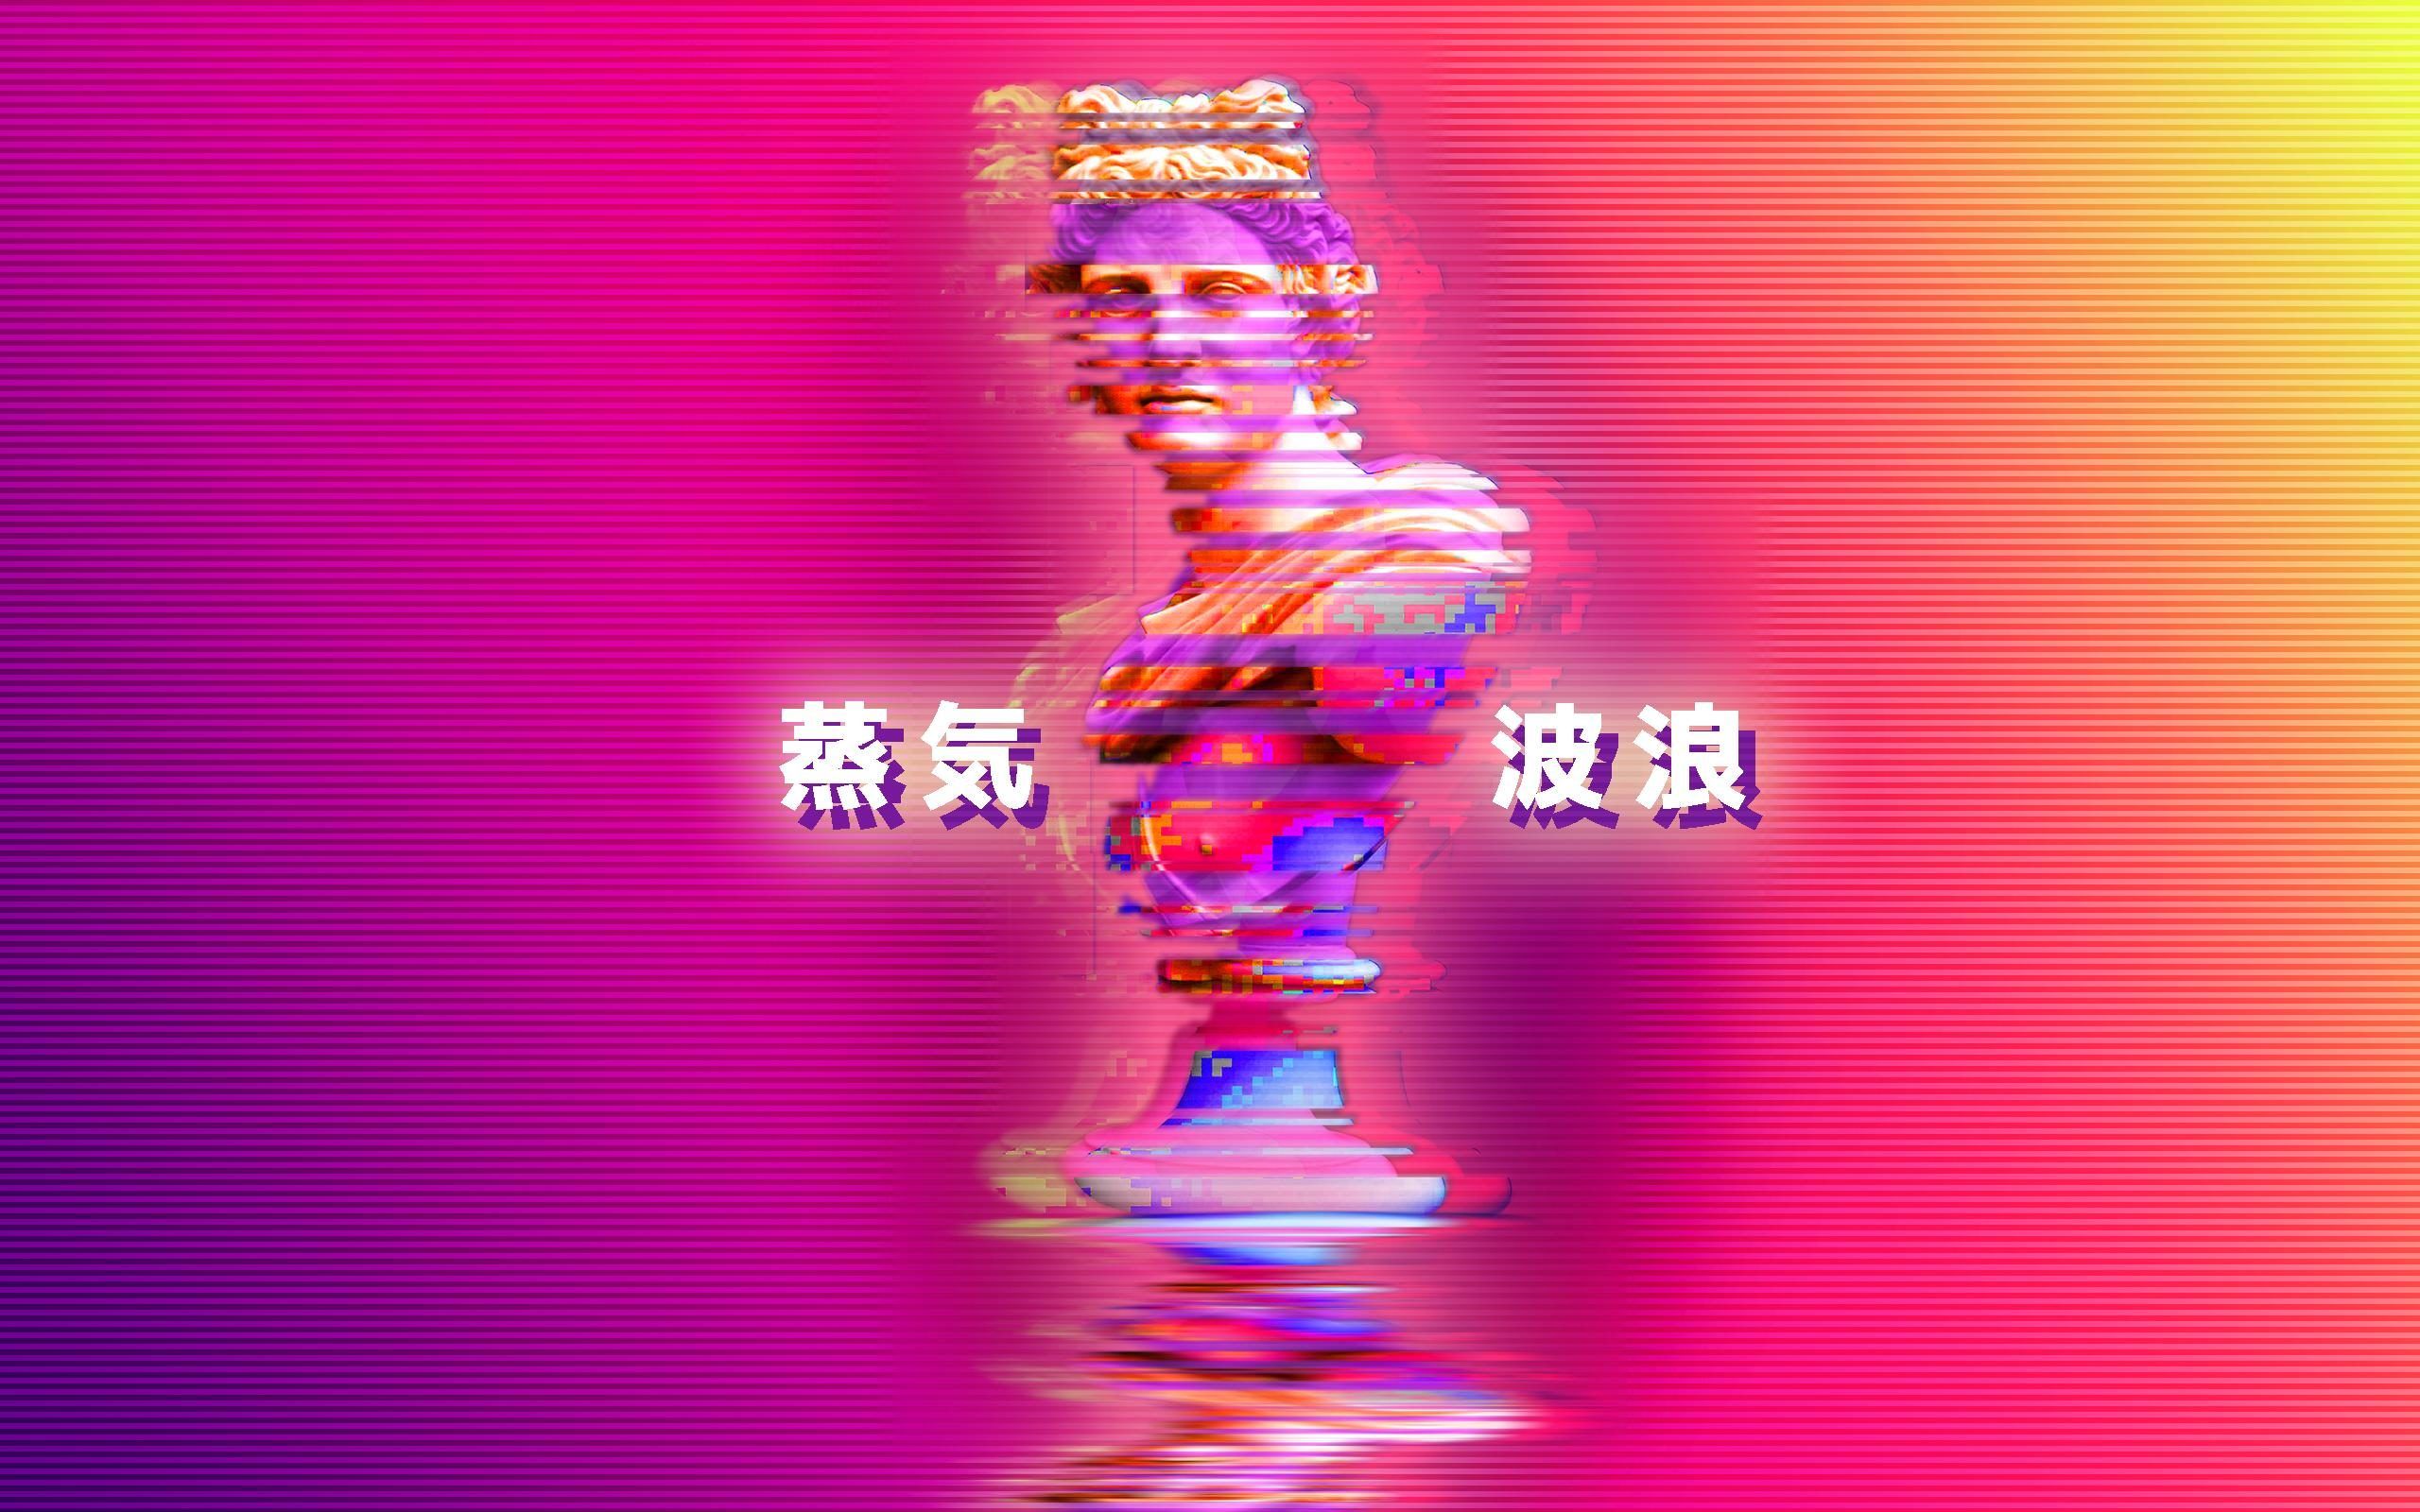 Vaporwave Aesthetic Backgrounds for PC 